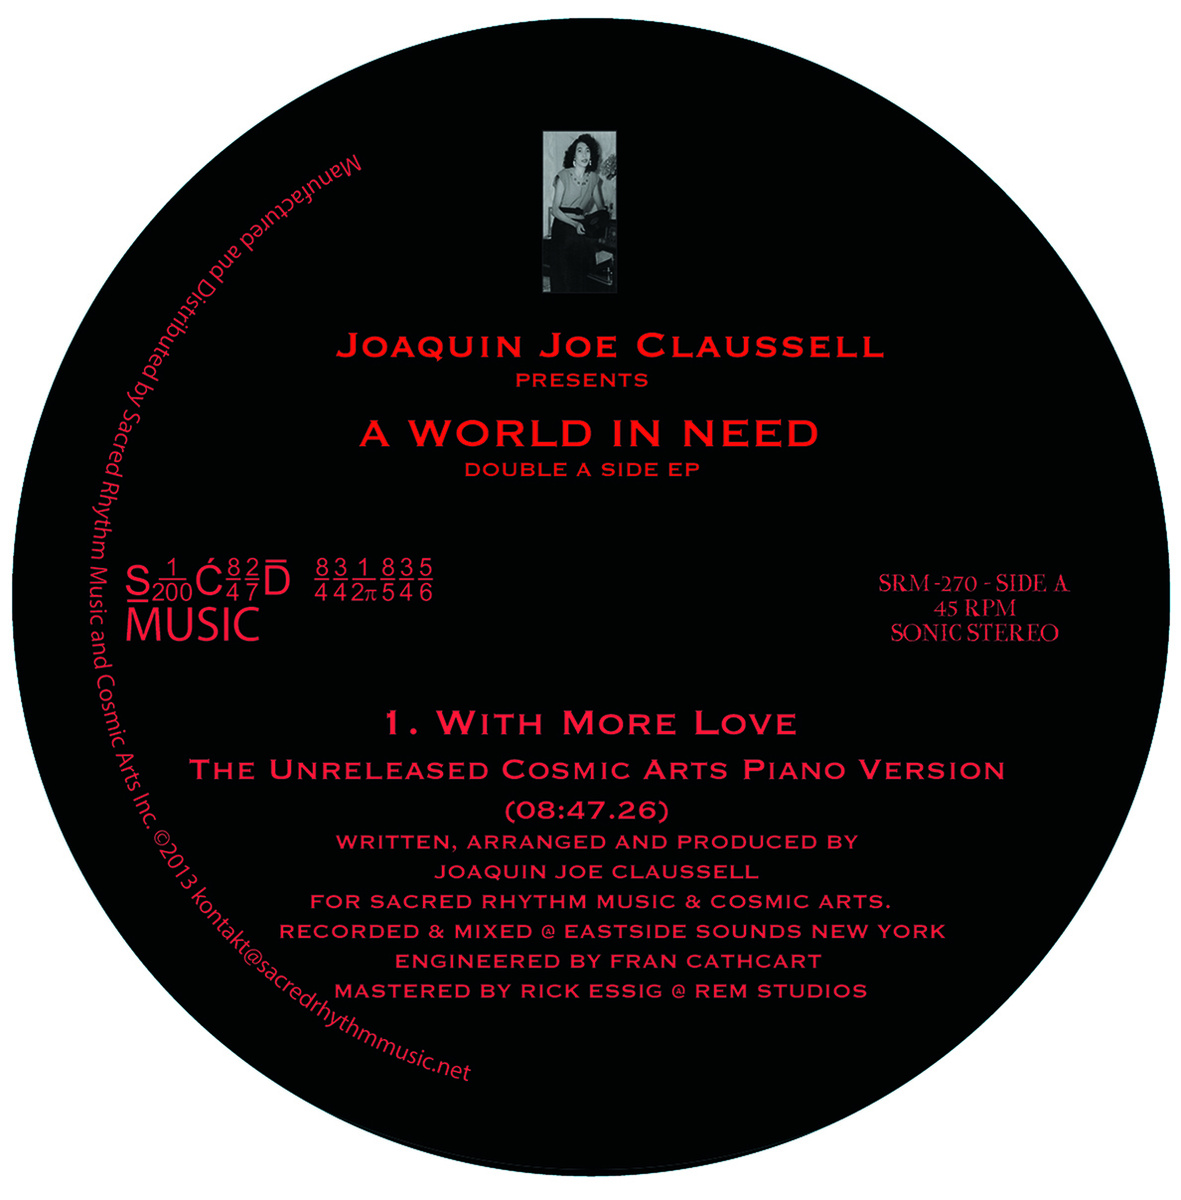 Joaquin Joe Claussell - A World In Need - Double A Side EP